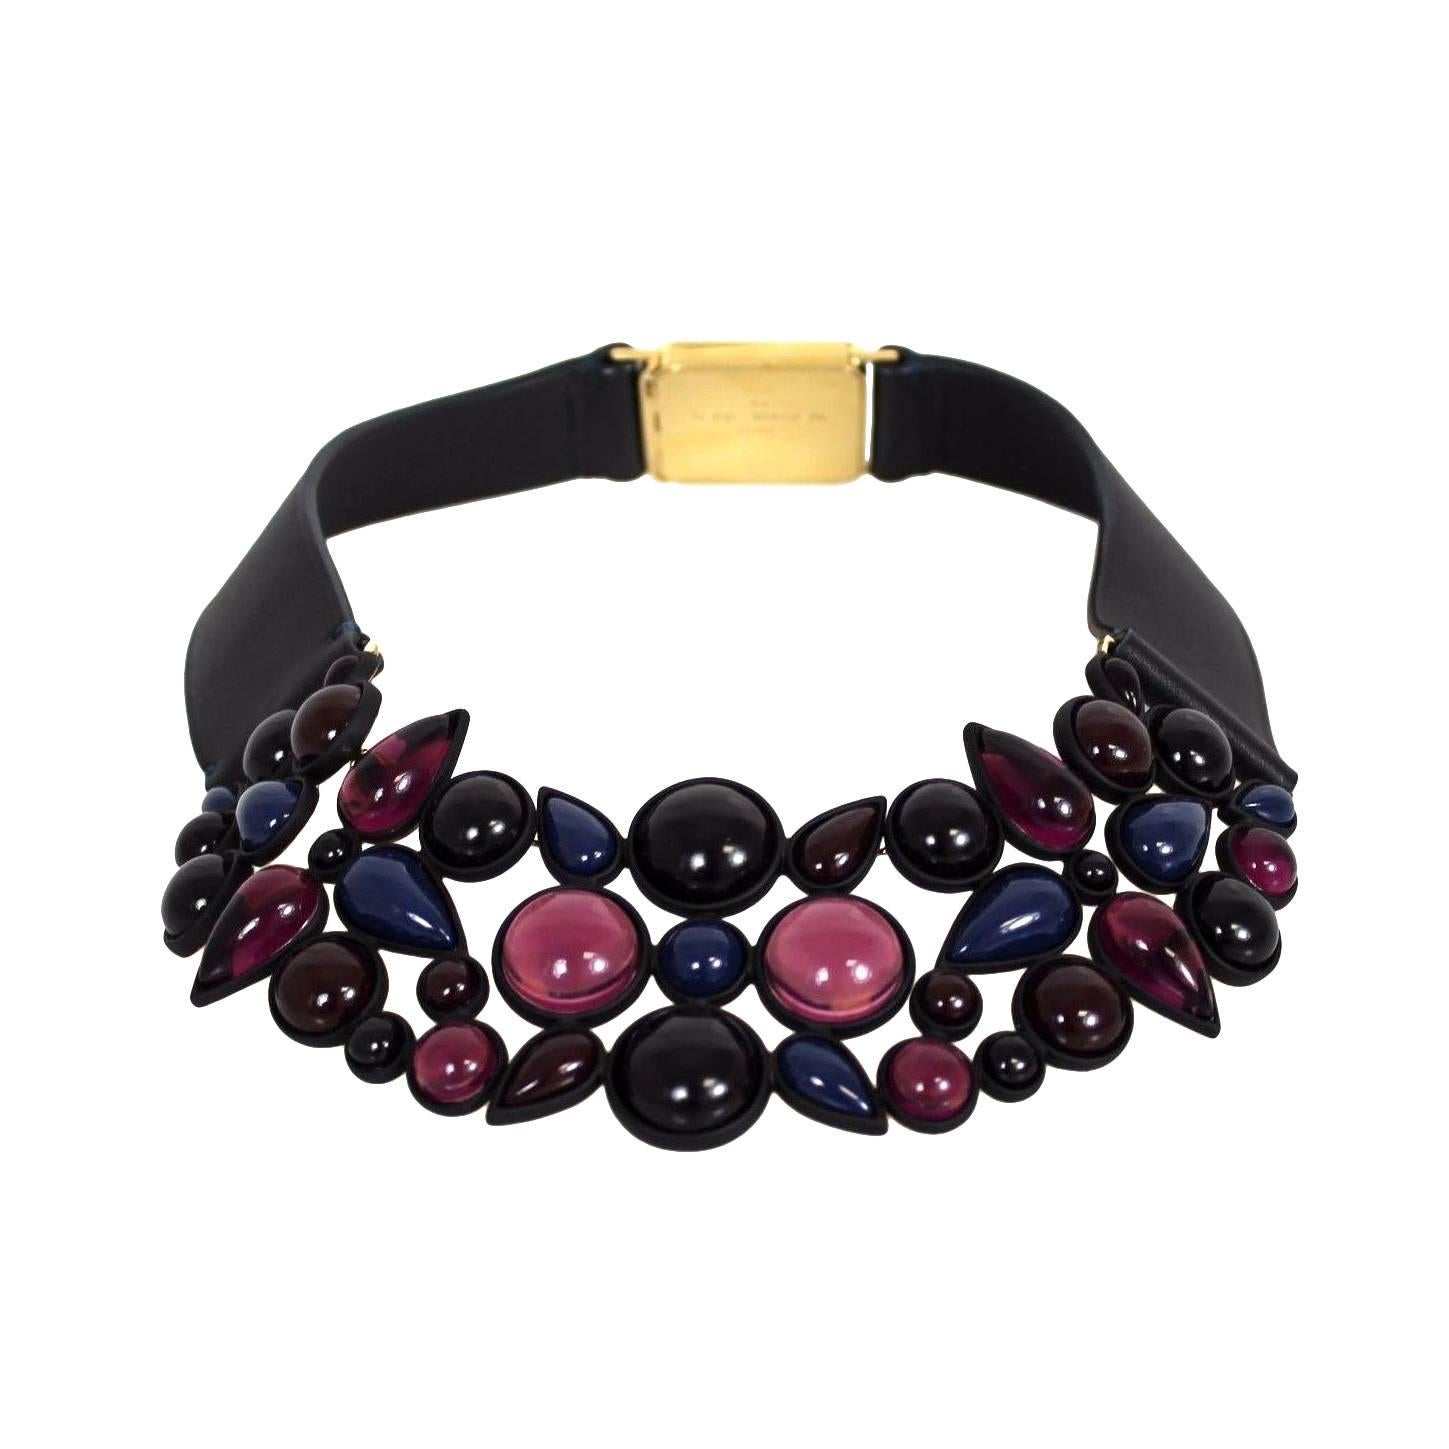 Louis Vuitton Purple Indigo Stone Embellished Black Leather Gold Collar Necklace For Sale